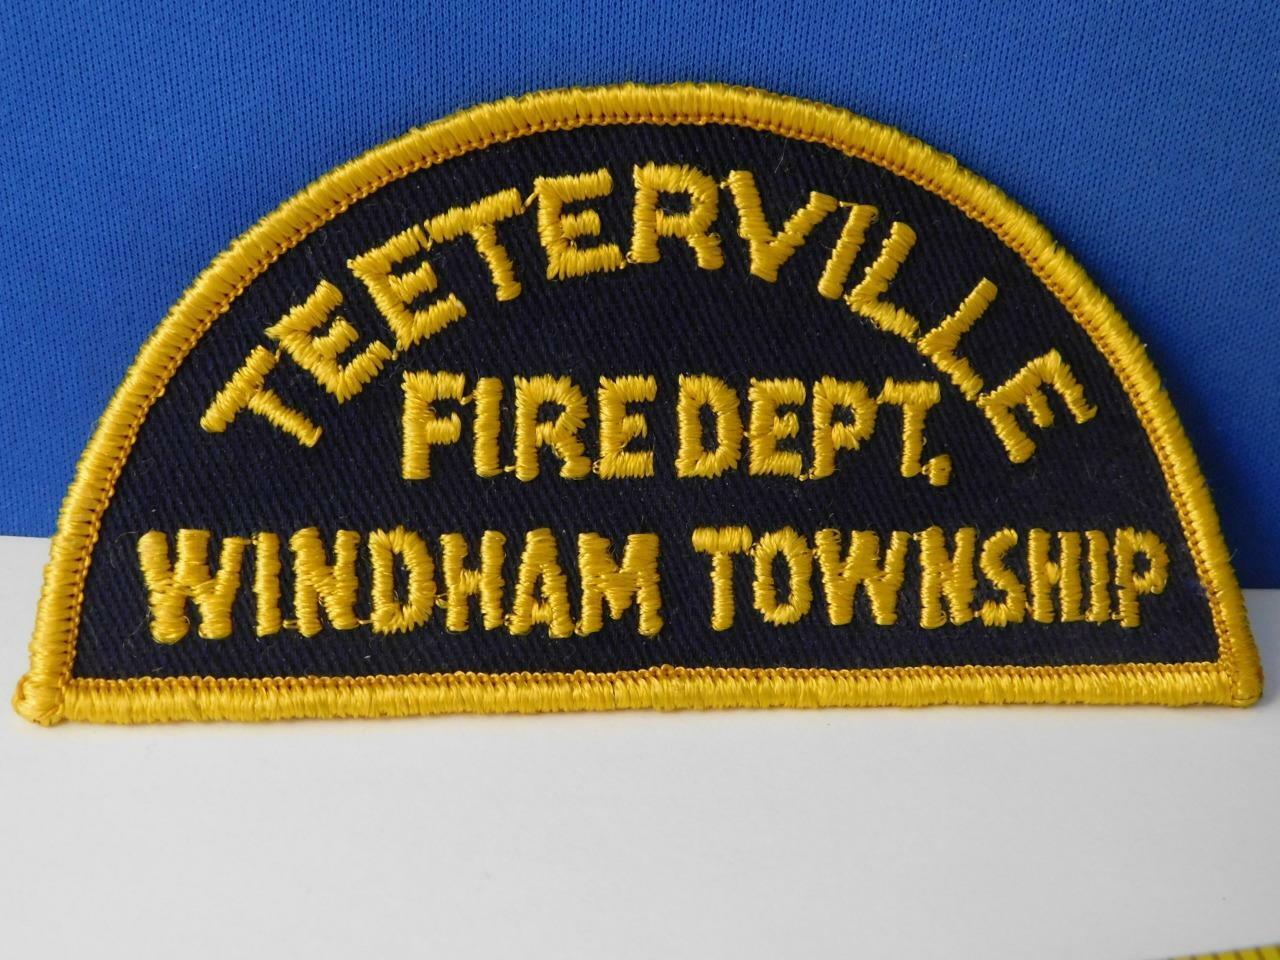 Teeterville Windham Township Fire Department Fighter Vintage Patch Badge Ontario